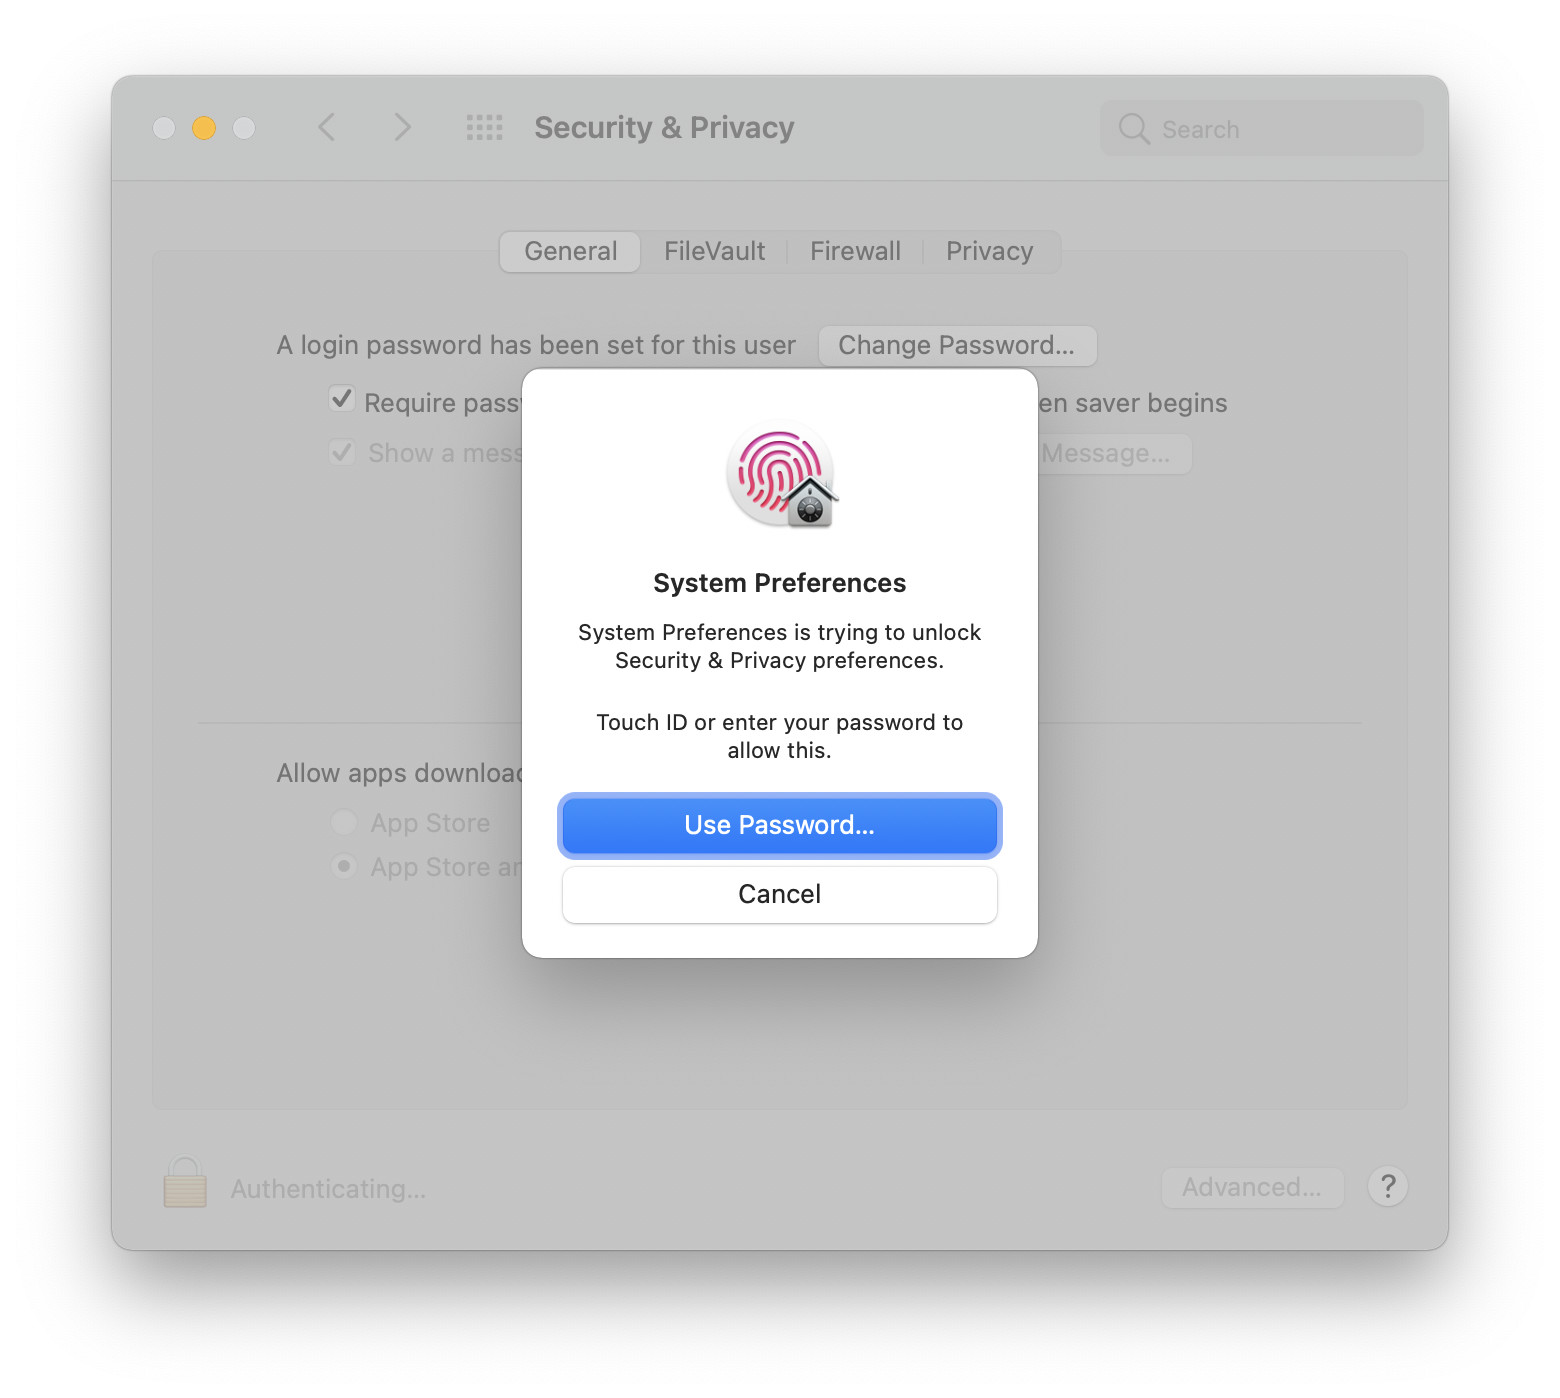 Security and Privacy Prefs